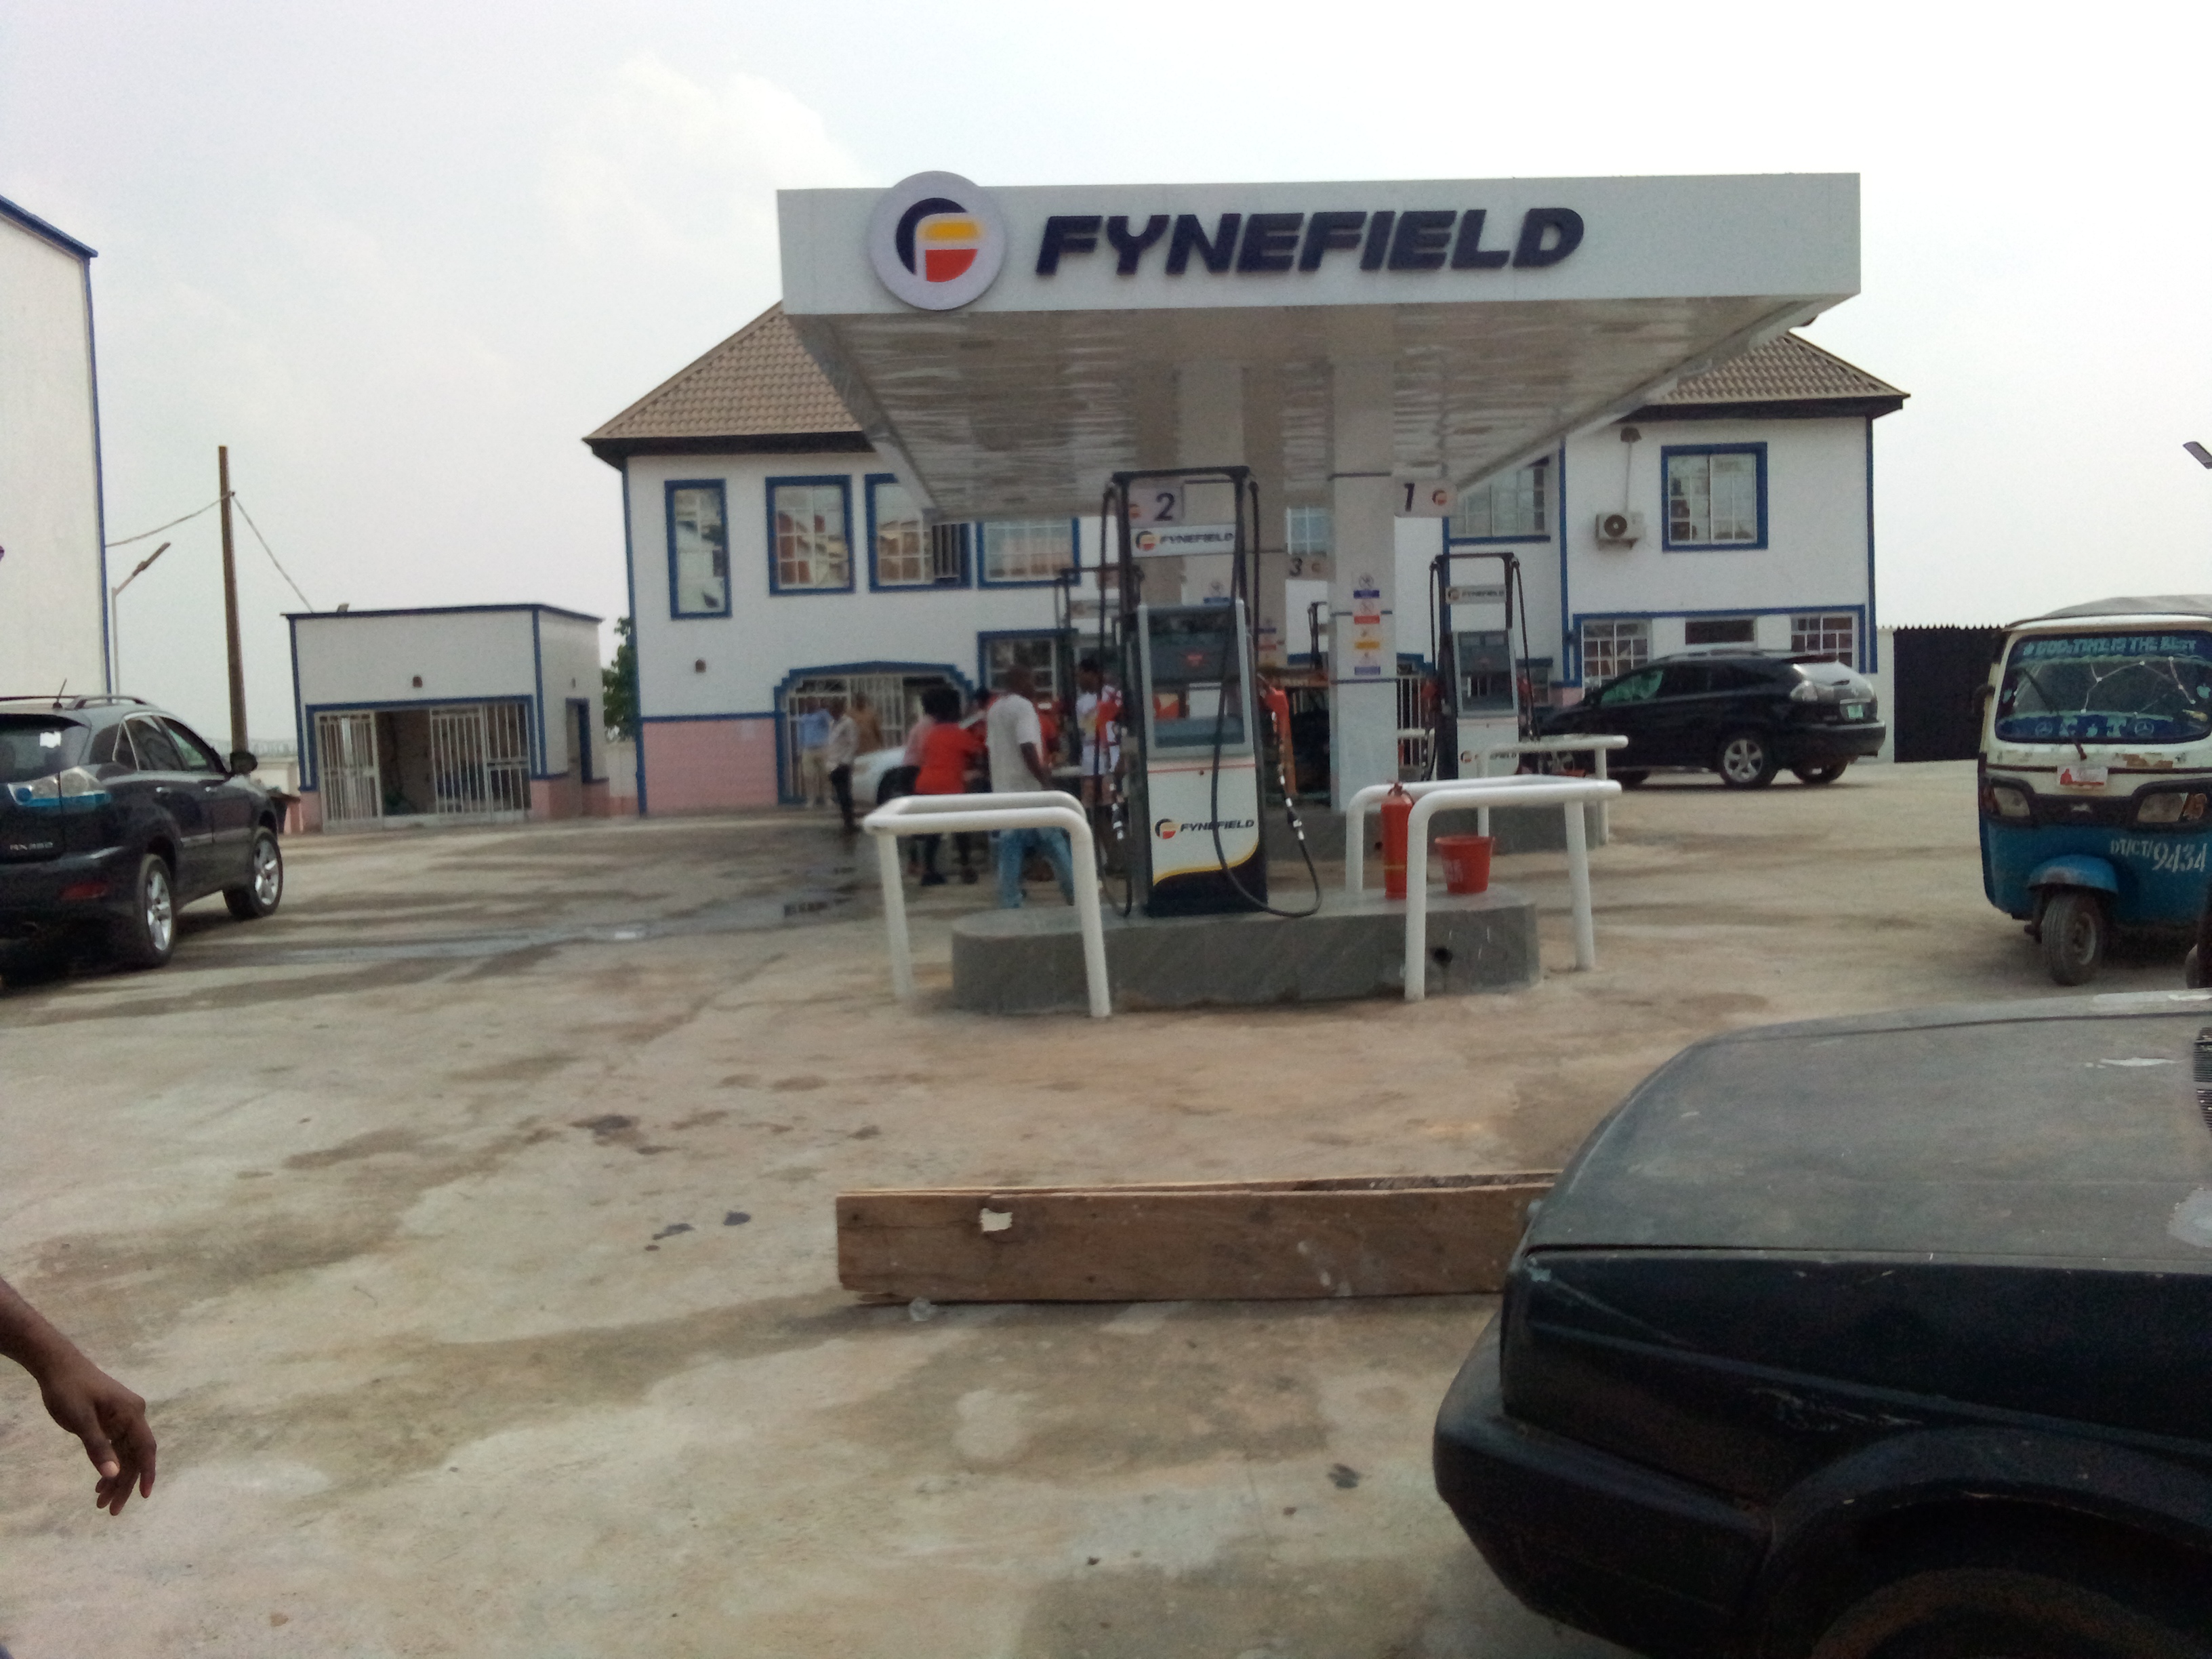 Rainoil, Fynefield, North West  fuel stations deny citizens fuel in Jerry cans, increase pain of Nigerians.